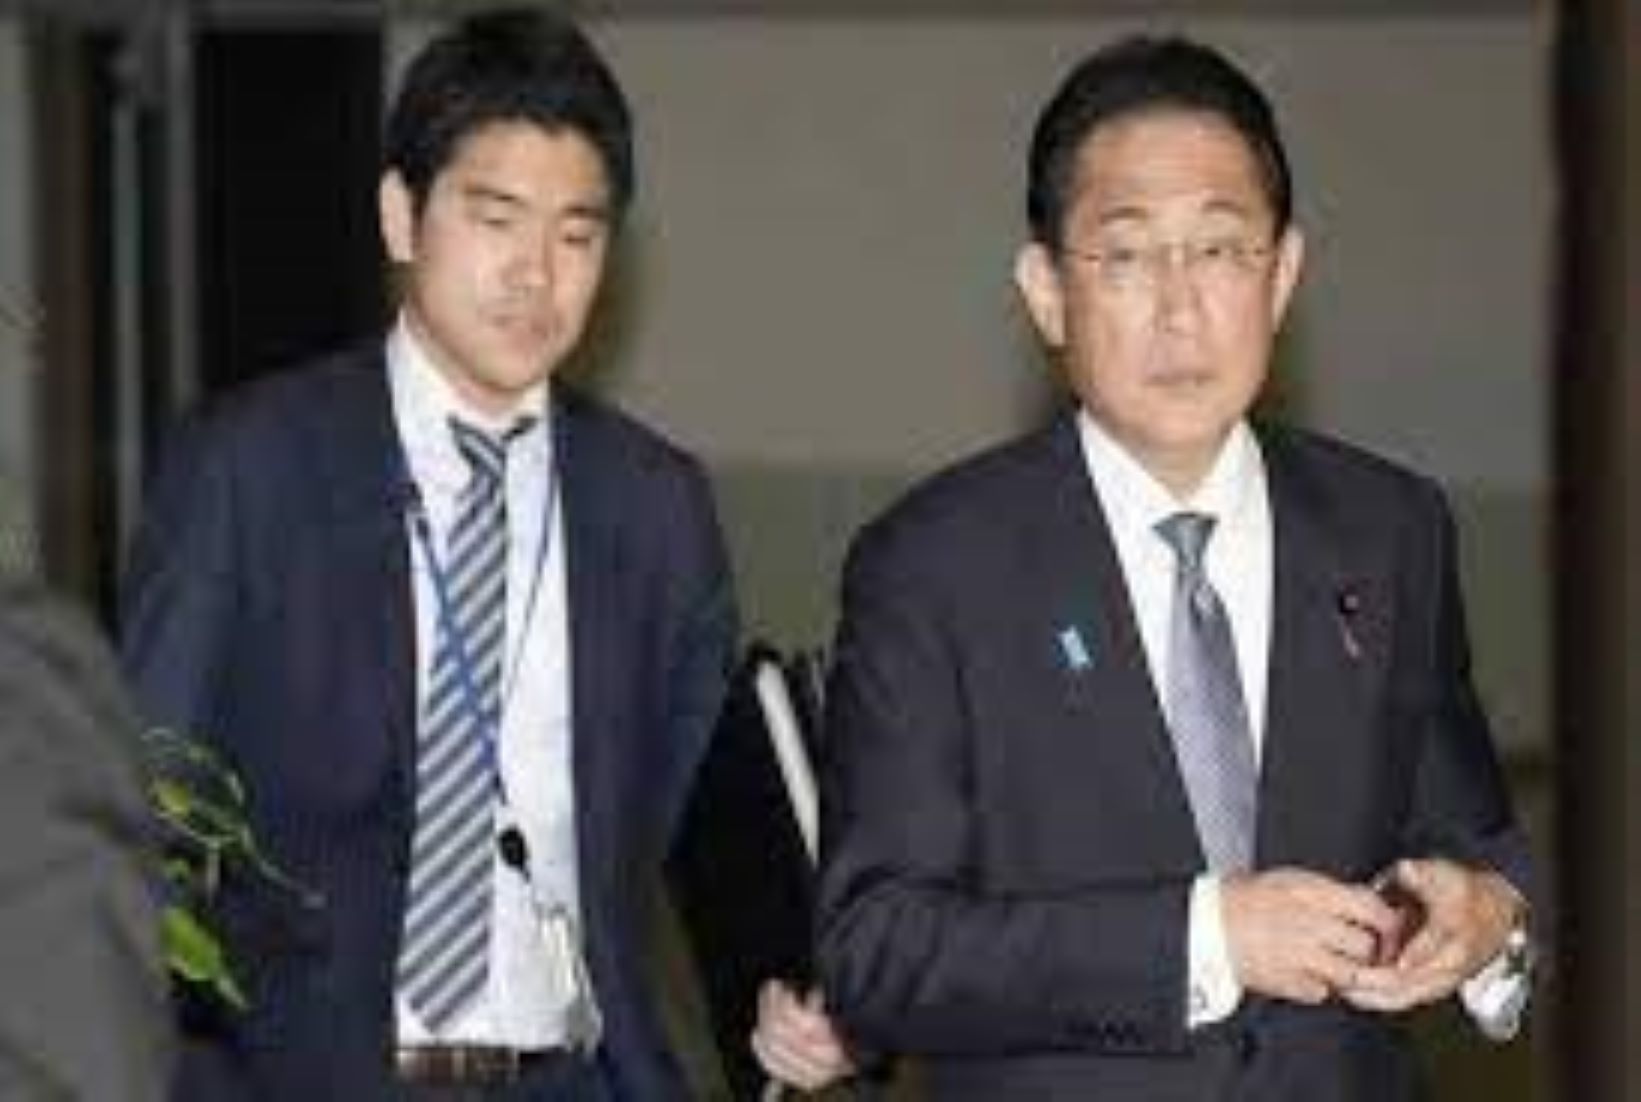 Japan PM’s Son To Step Down As Executive Secretary Amid Public Criticism